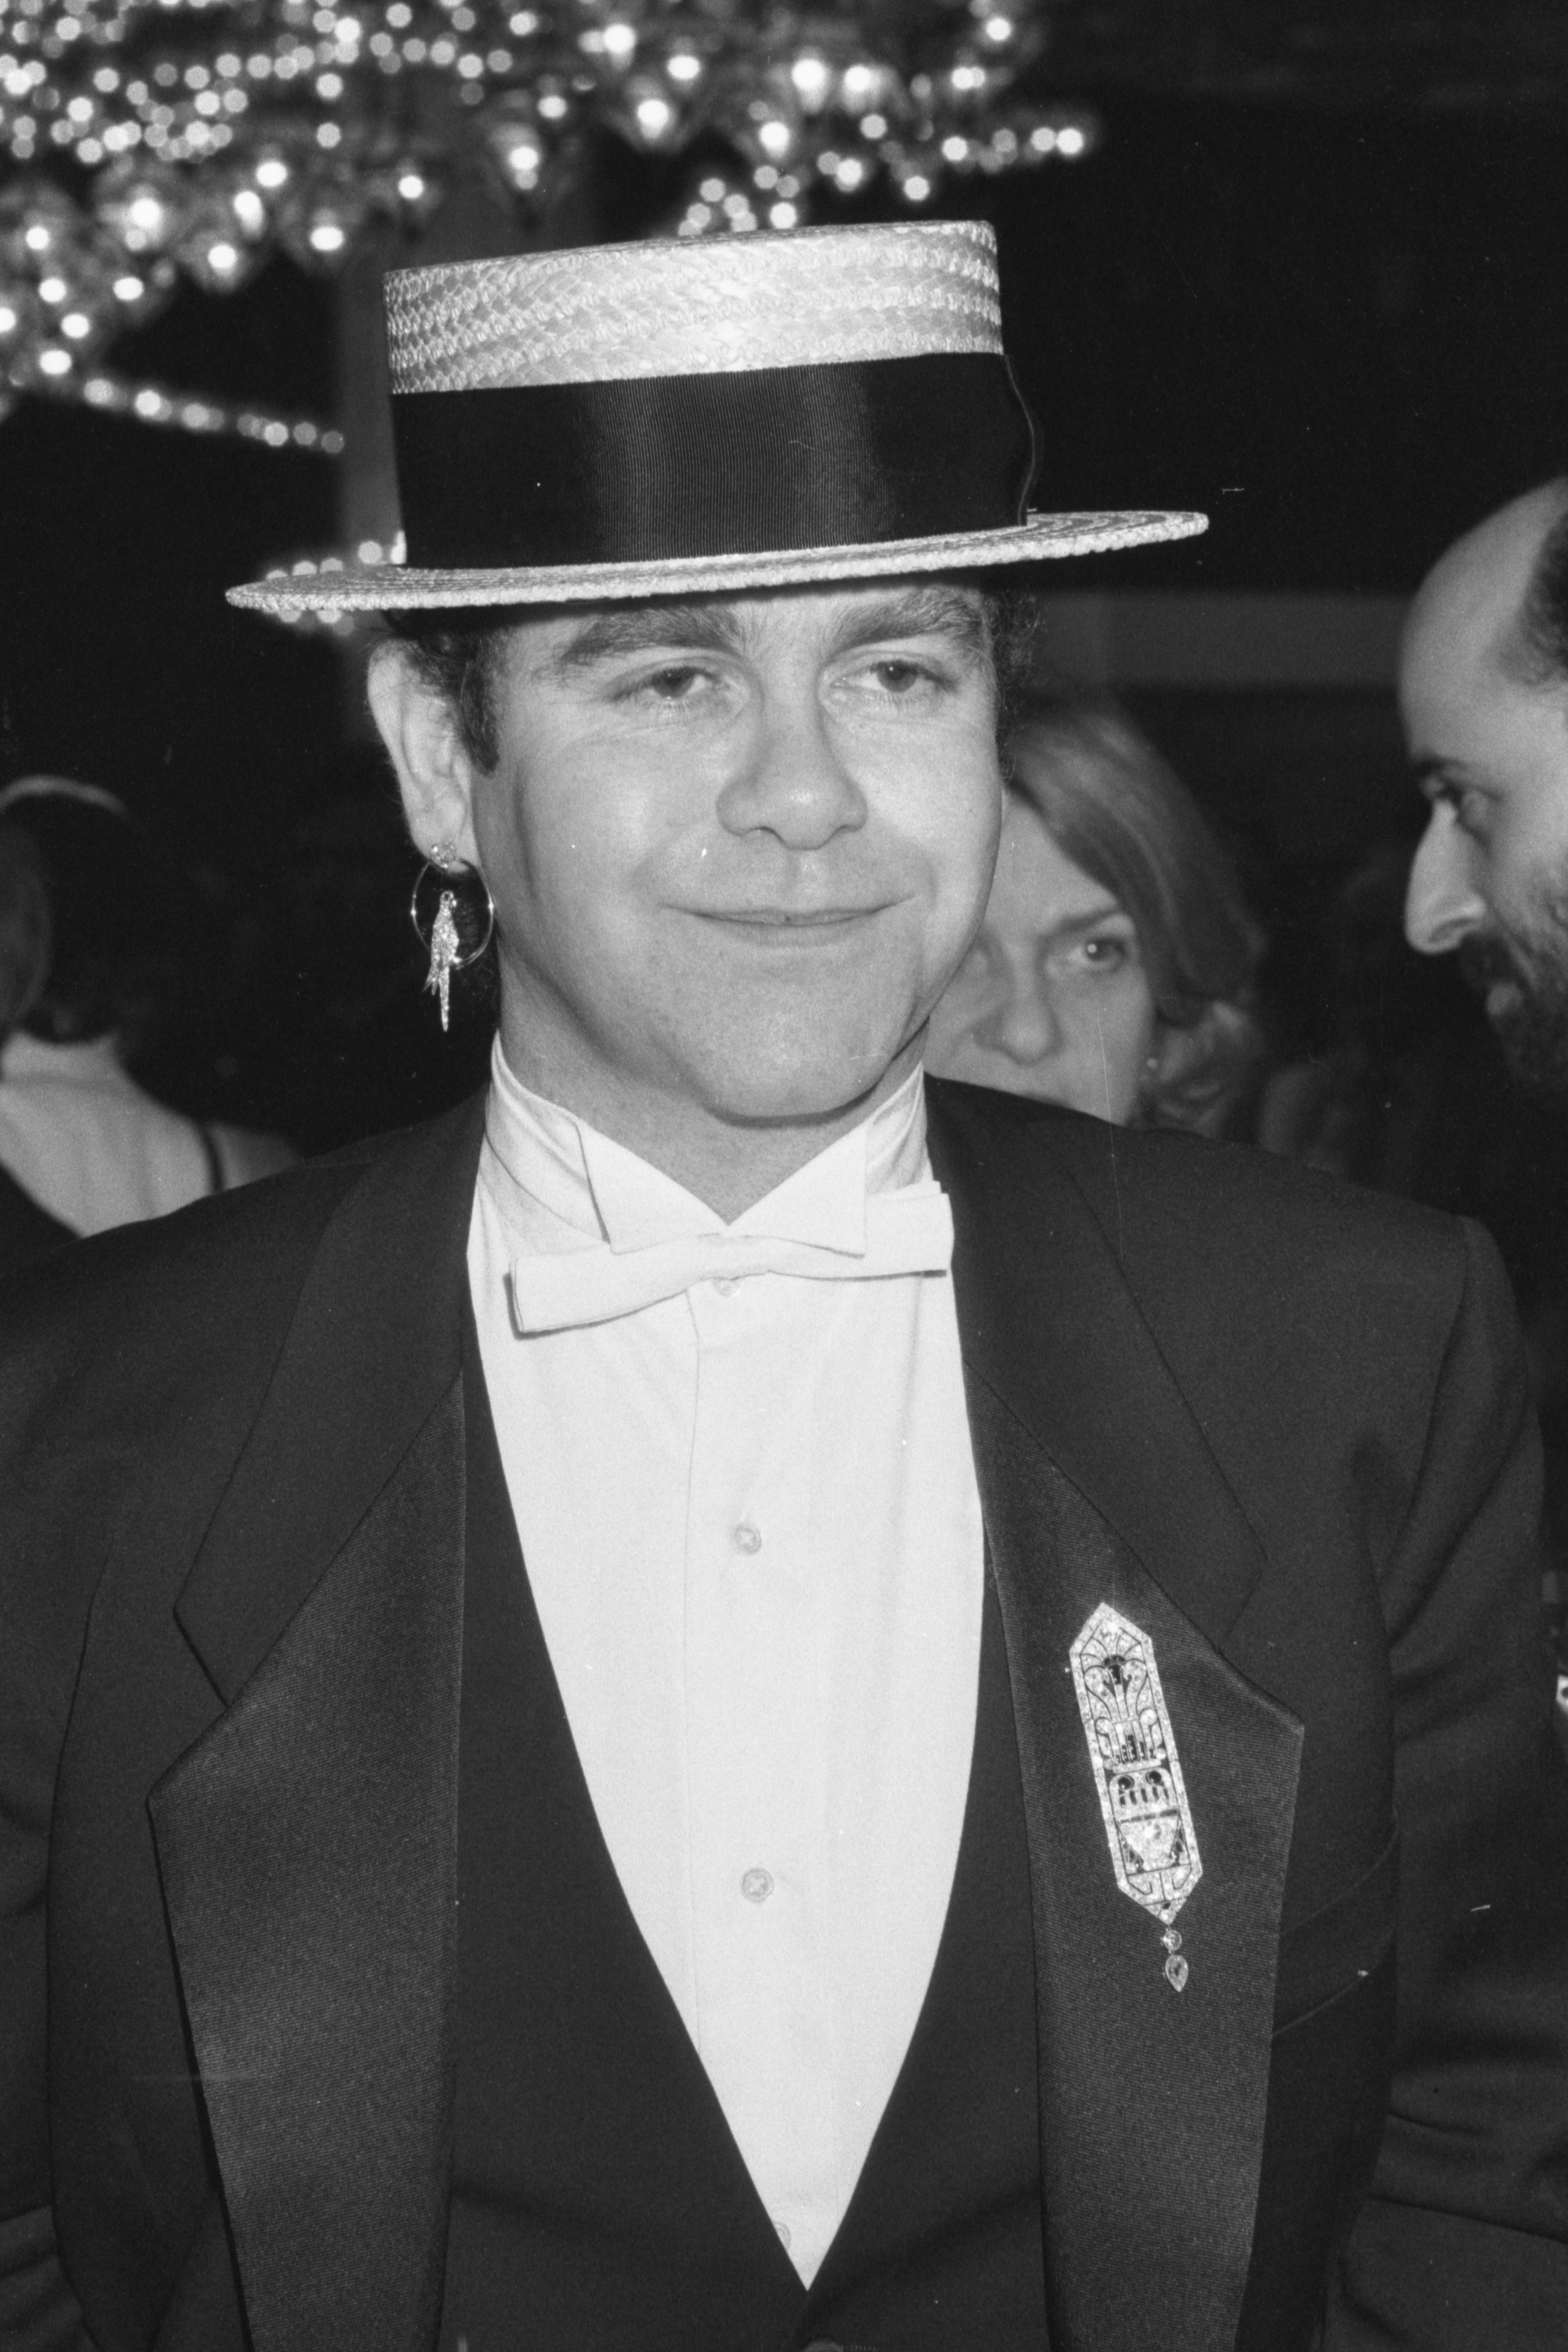 Elton in a suit and bow tie and top hat